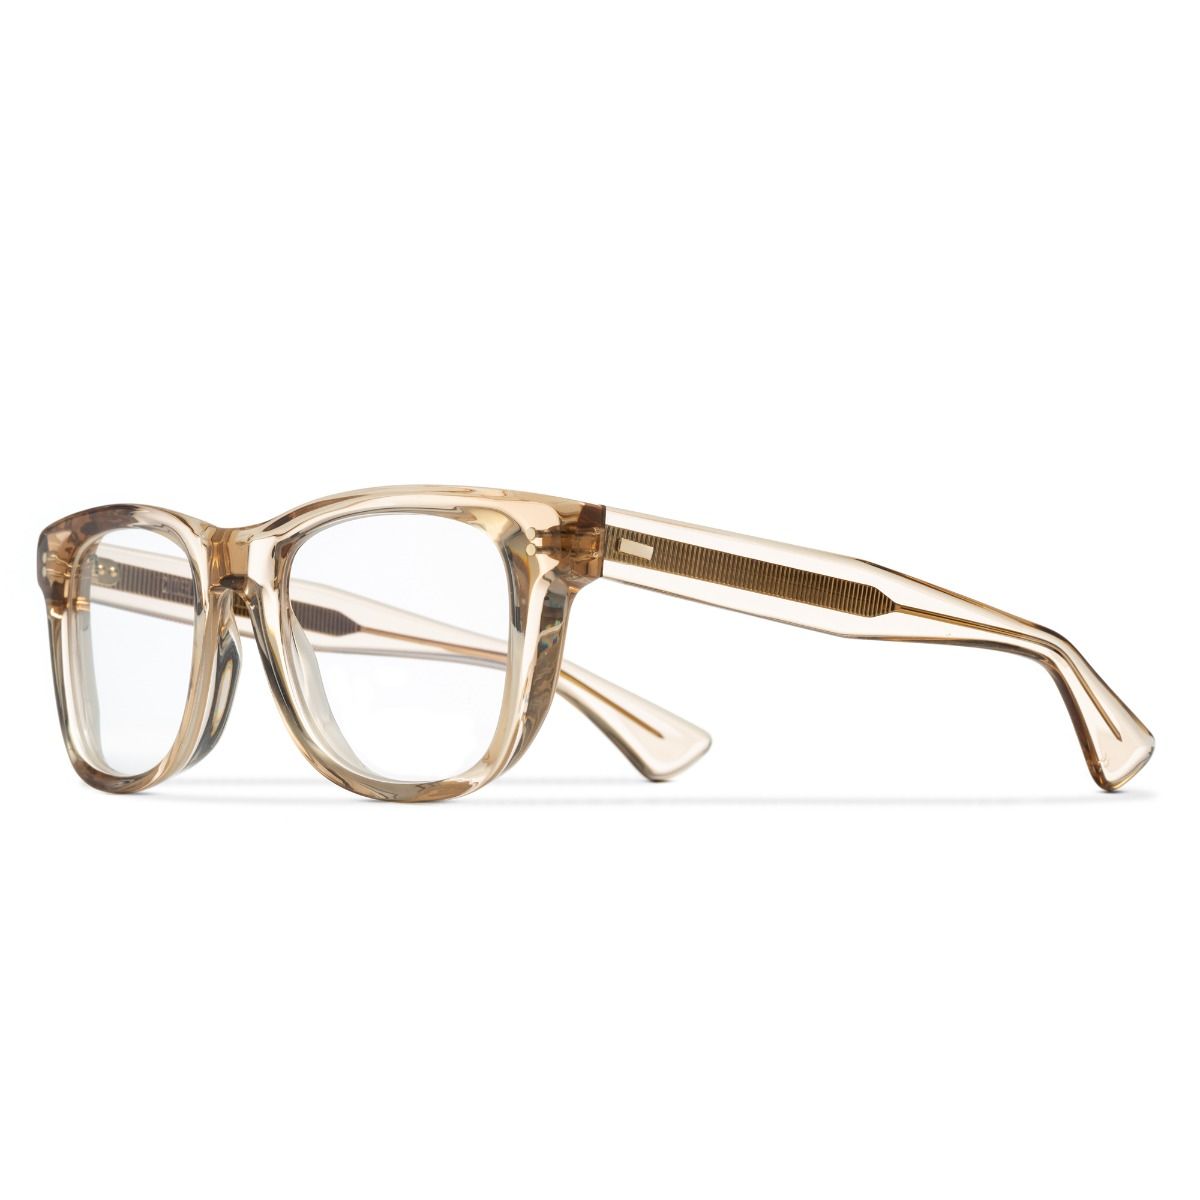 Cutler and Gross, 9101 Optical Square Glasses - Granny Chic